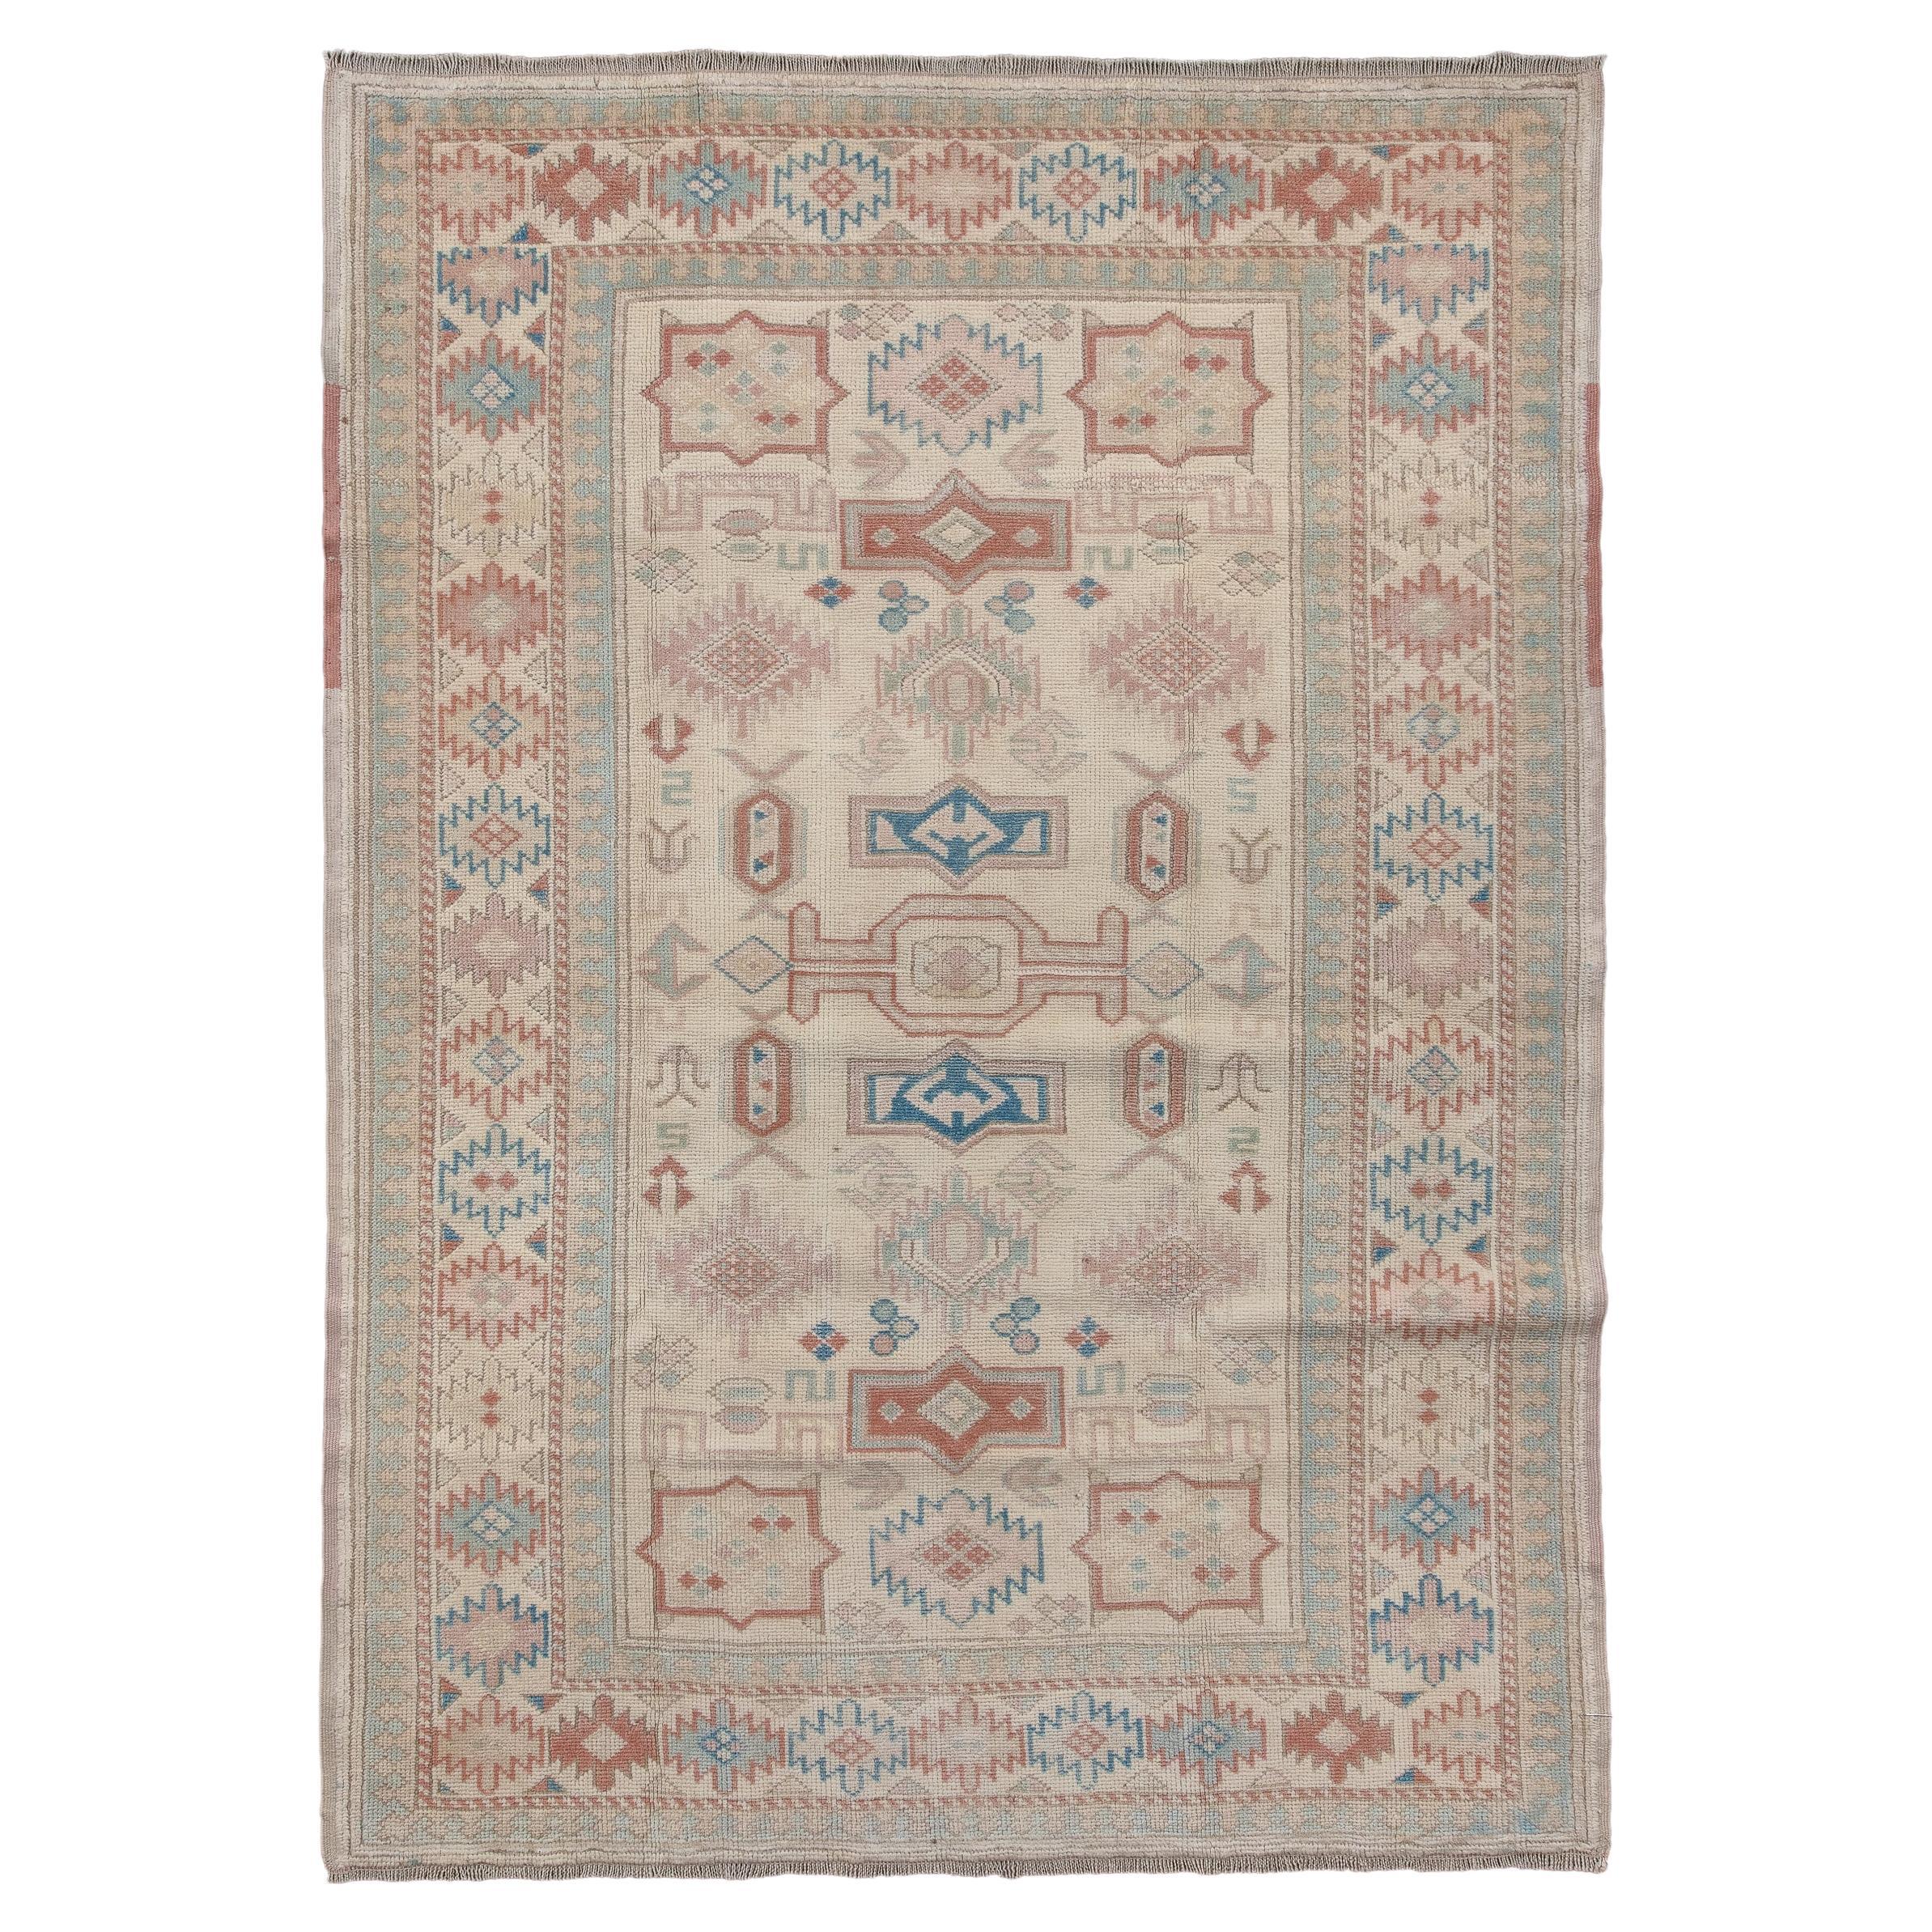 Antique Oushak Rug with Soft Palette